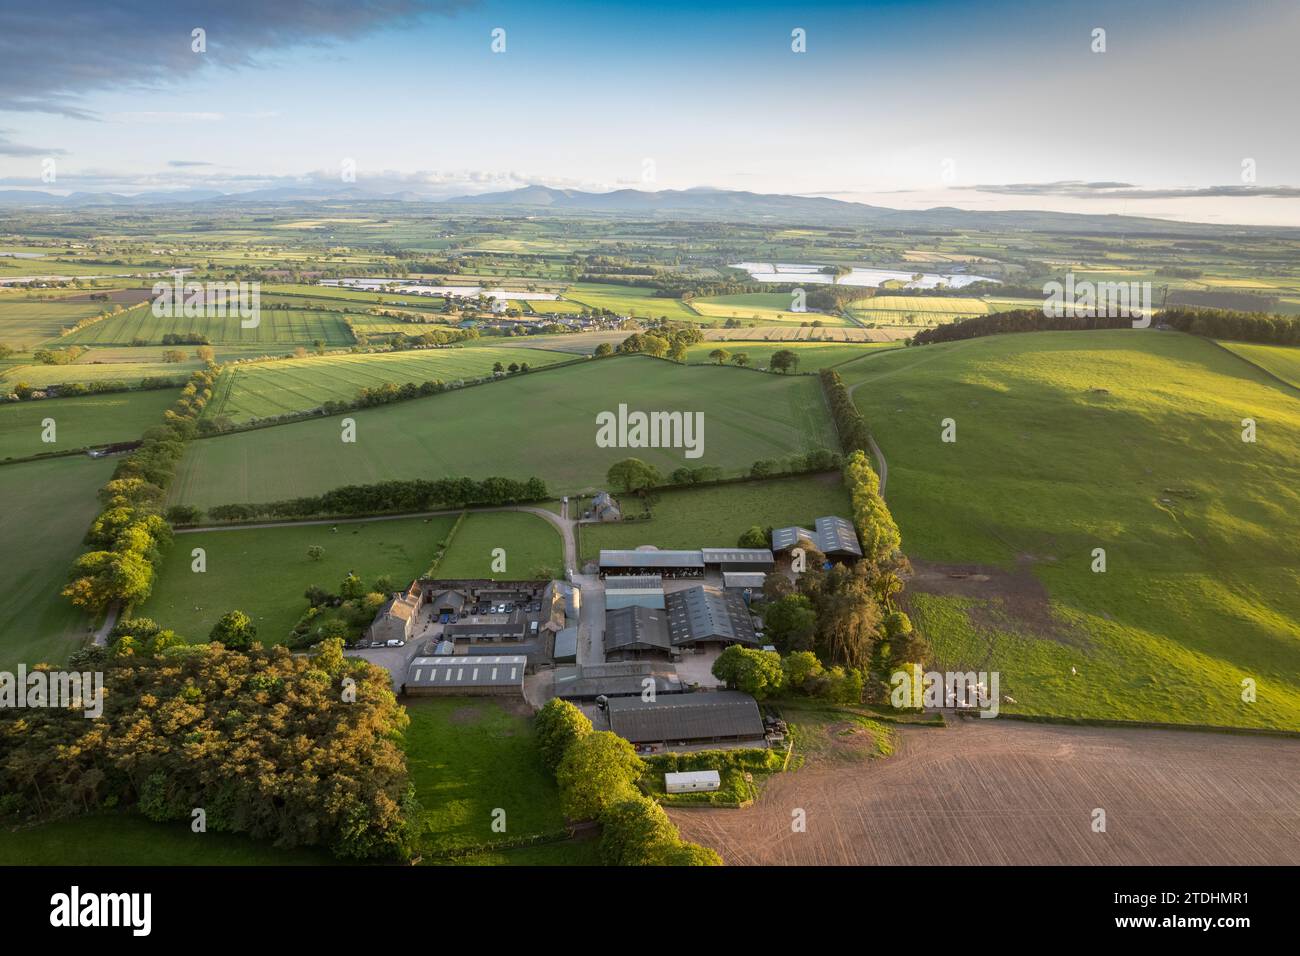 Farmstead in the Eden valley near Carlisle, looking towards the mountains of the Lake District, Cumbria, UK. Stock Photo